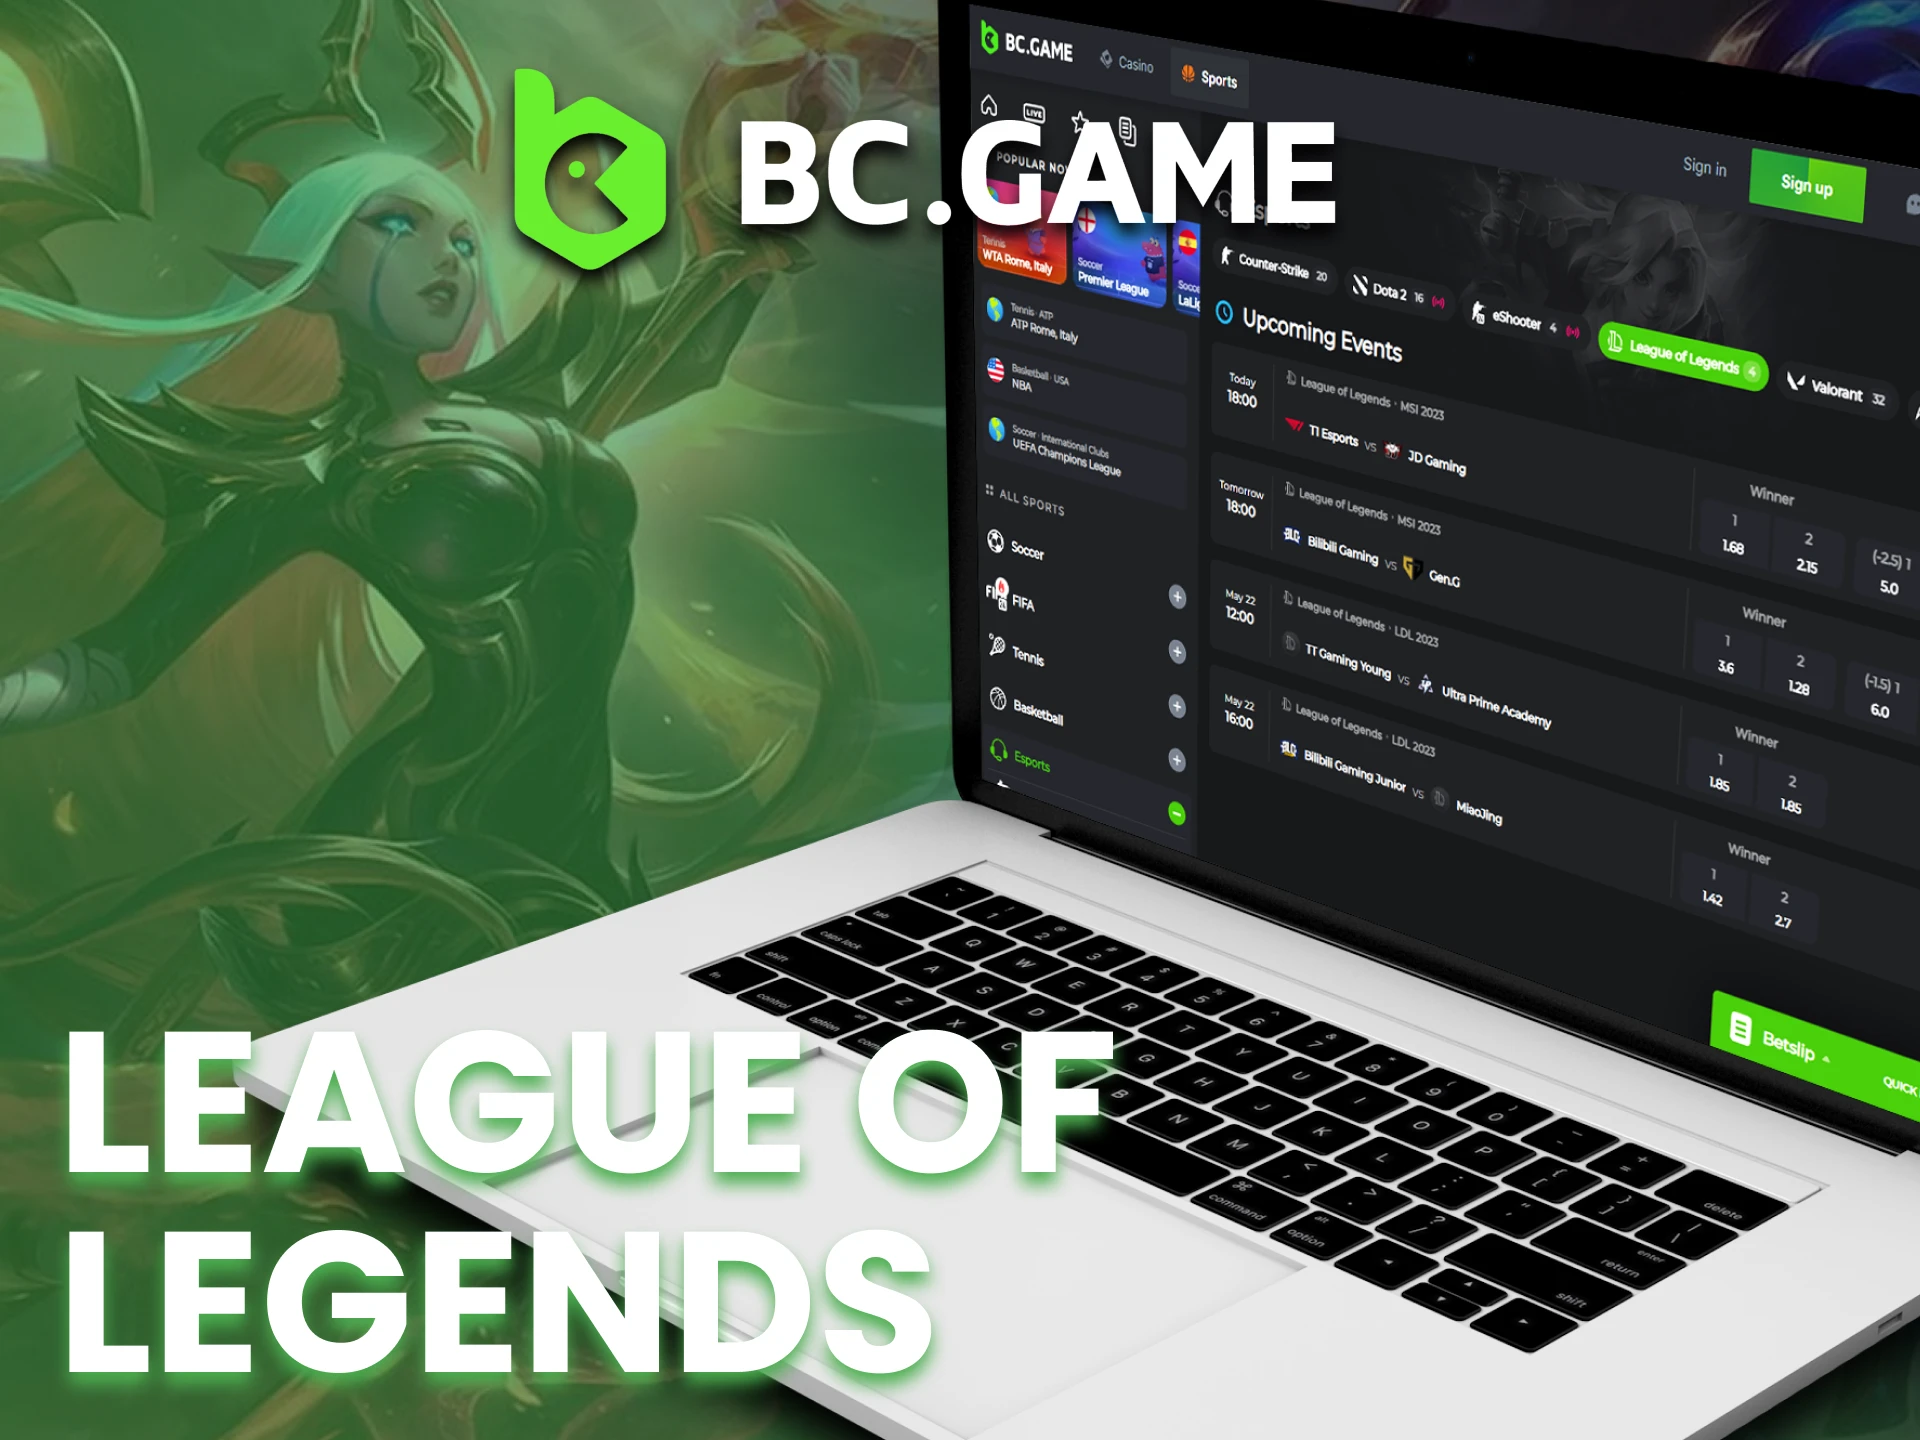 Bet on matches of biggest League of Legends tournaments at BC Game.